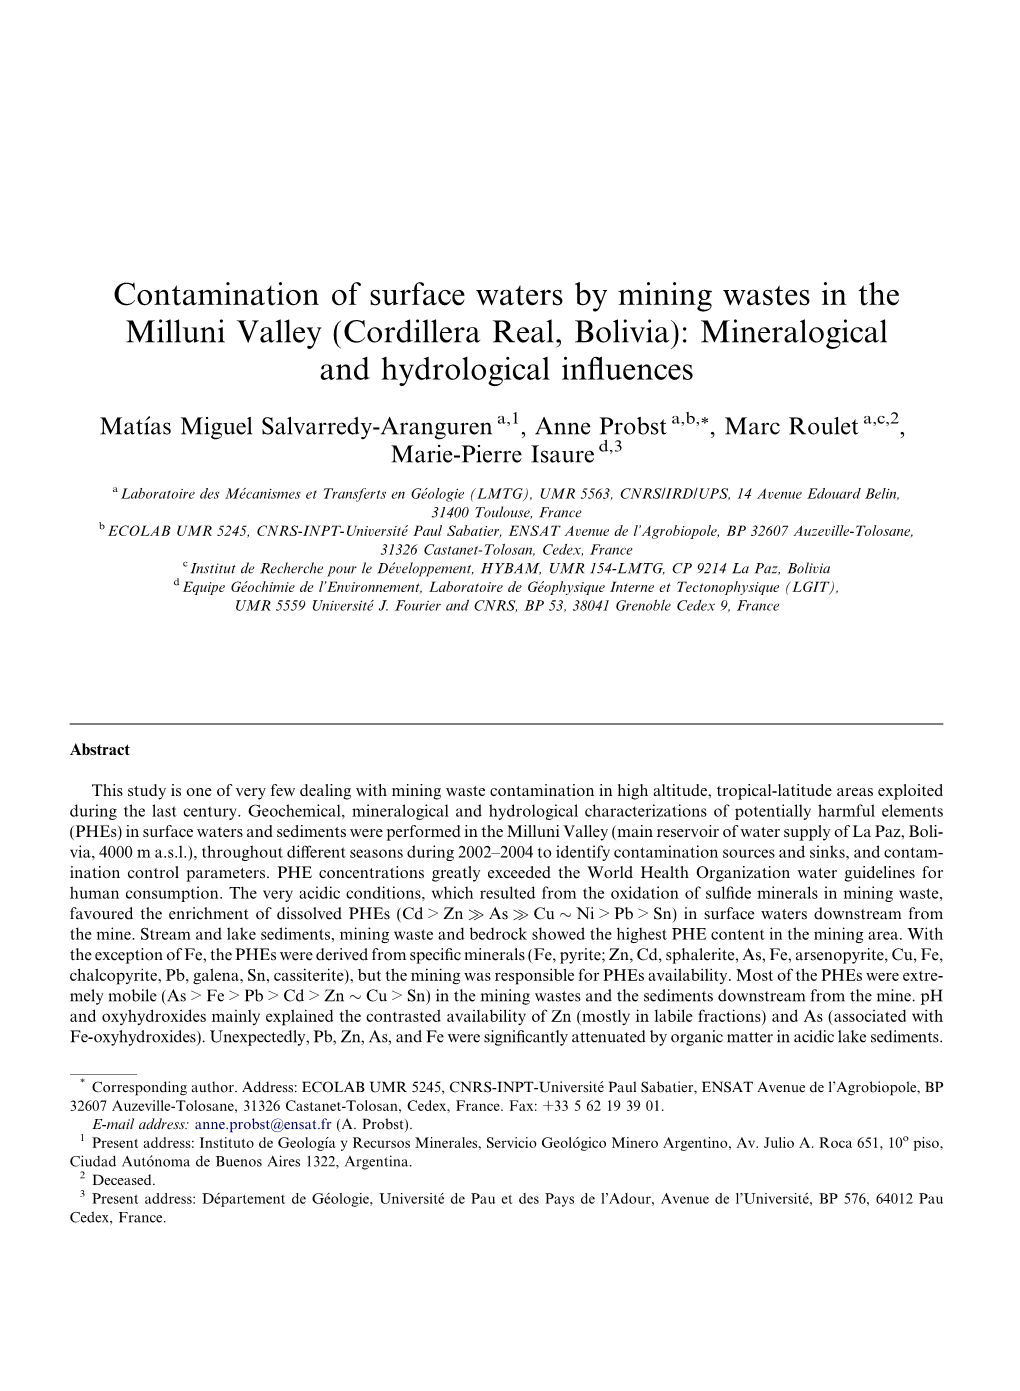 Contamination of Surface Waters by Mining Wastes in the Milluni Valley (Cordillera Real, Bolivia): Mineralogical and Hydrological Inﬂuences